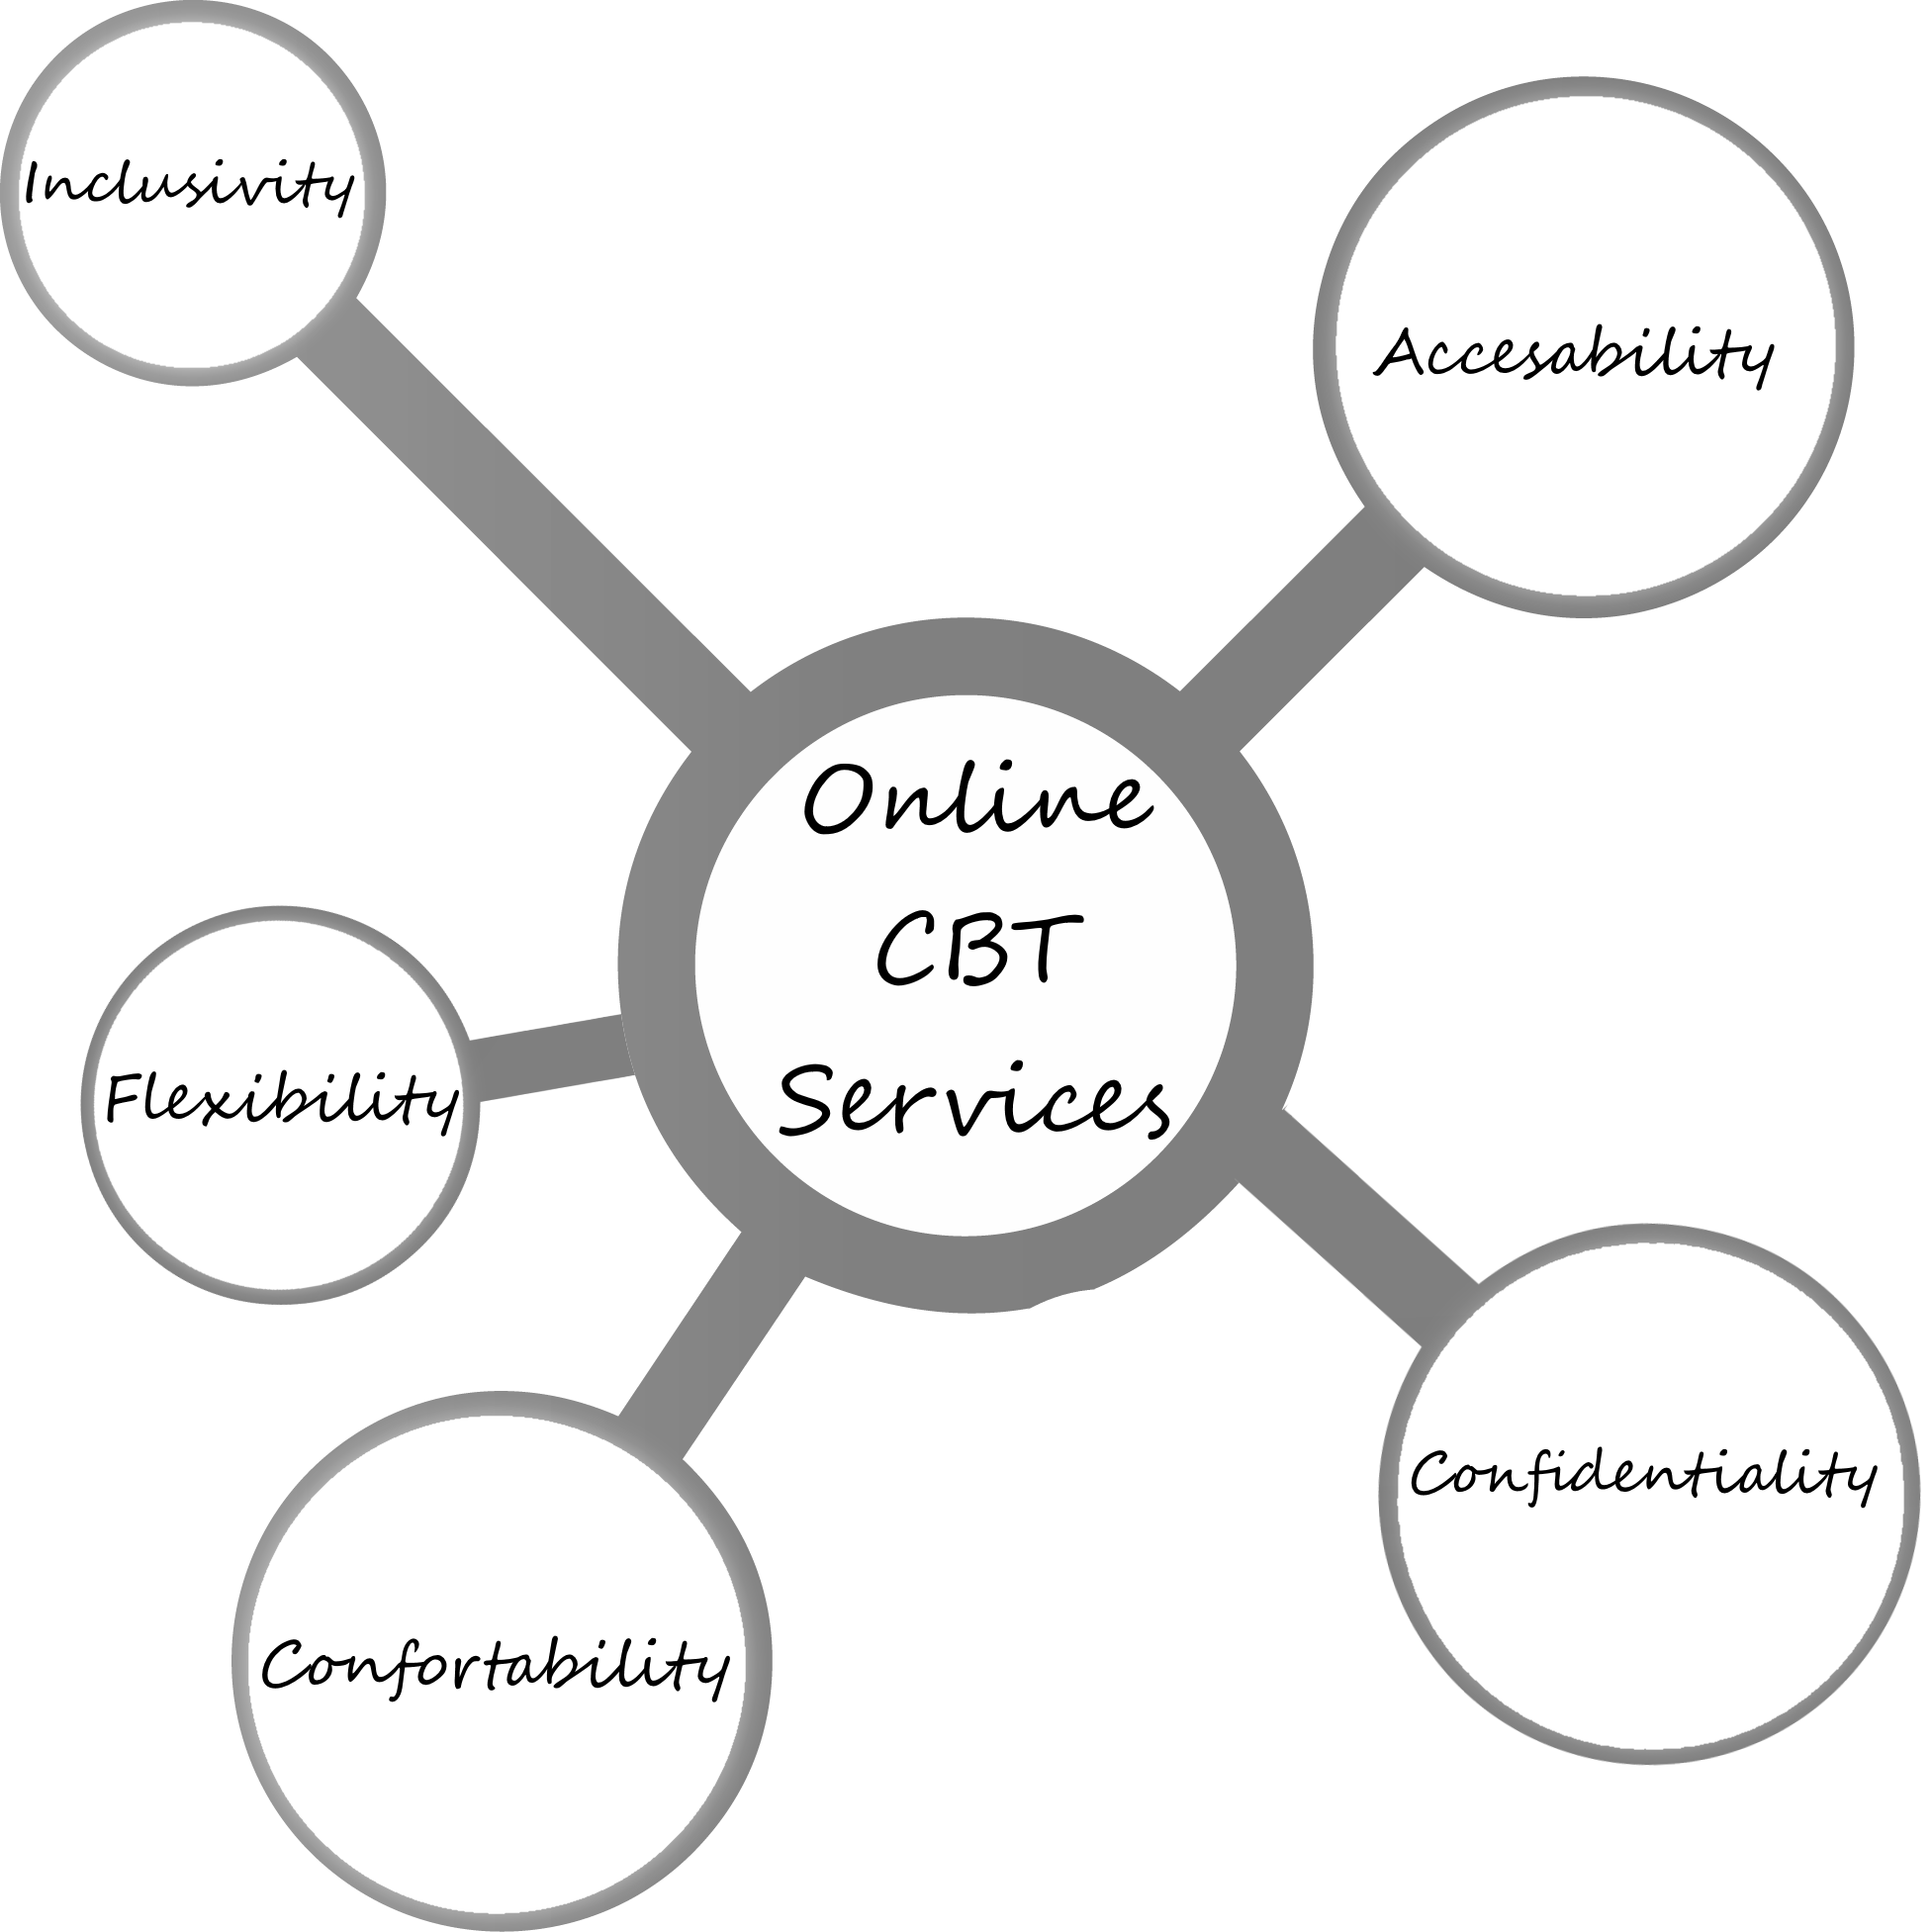 Online CBT Therapist Accesible, Inclusive, Flexible, Confidentiona and Confortable